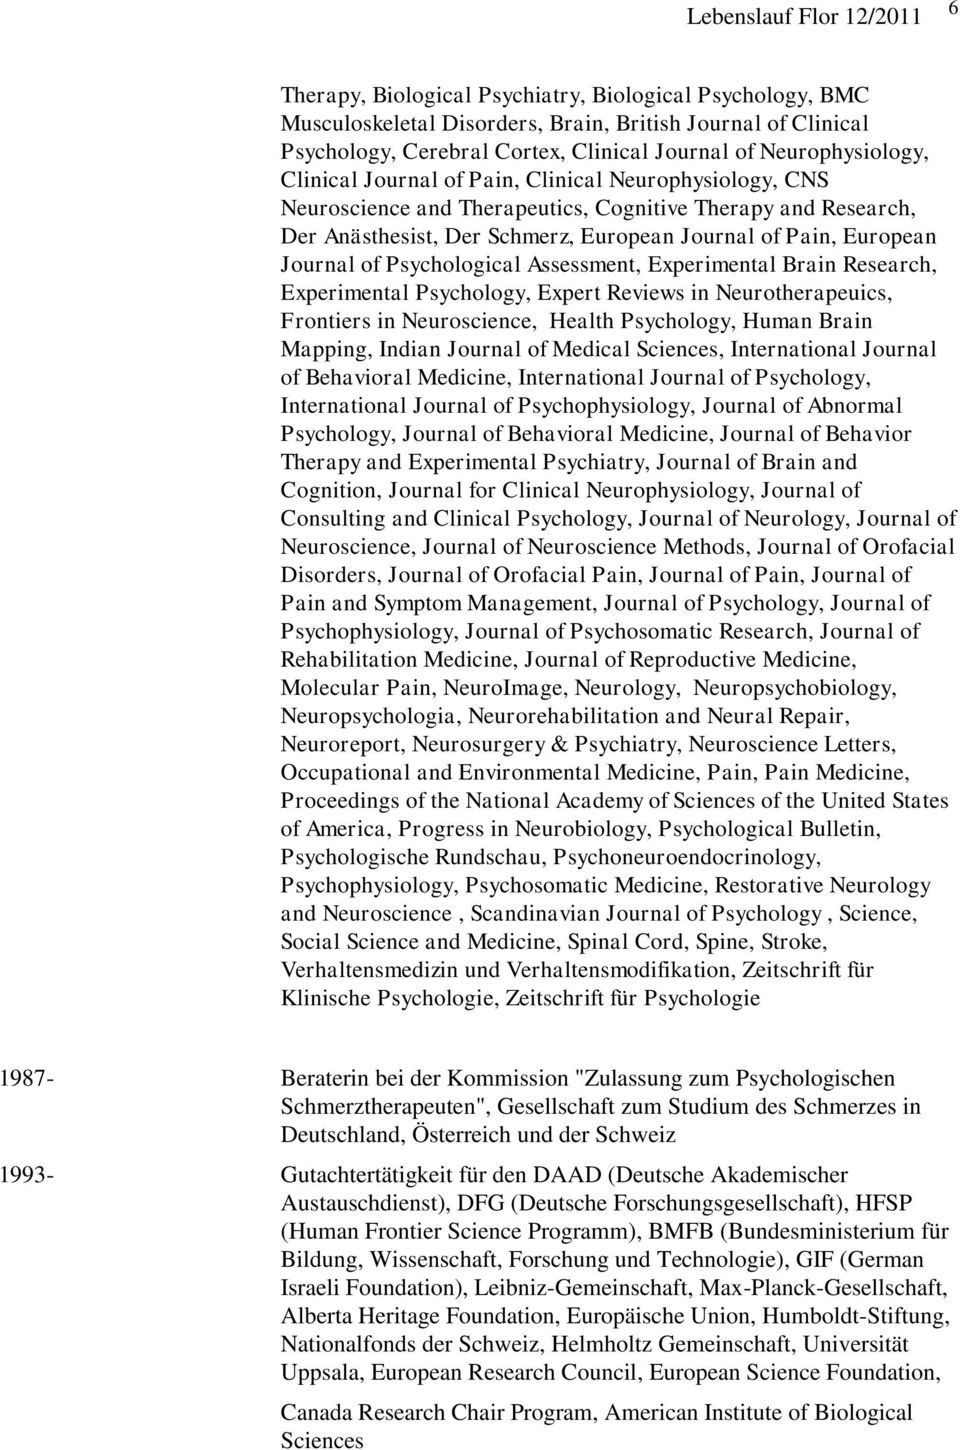 Assessment, Experimental Brain Research, Experimental Psychology, Expert Reviews in Neurotherapeuics, Frontiers in Neuroscience, Health Psychology, Human Brain Mapping, Indian Journal of Medical